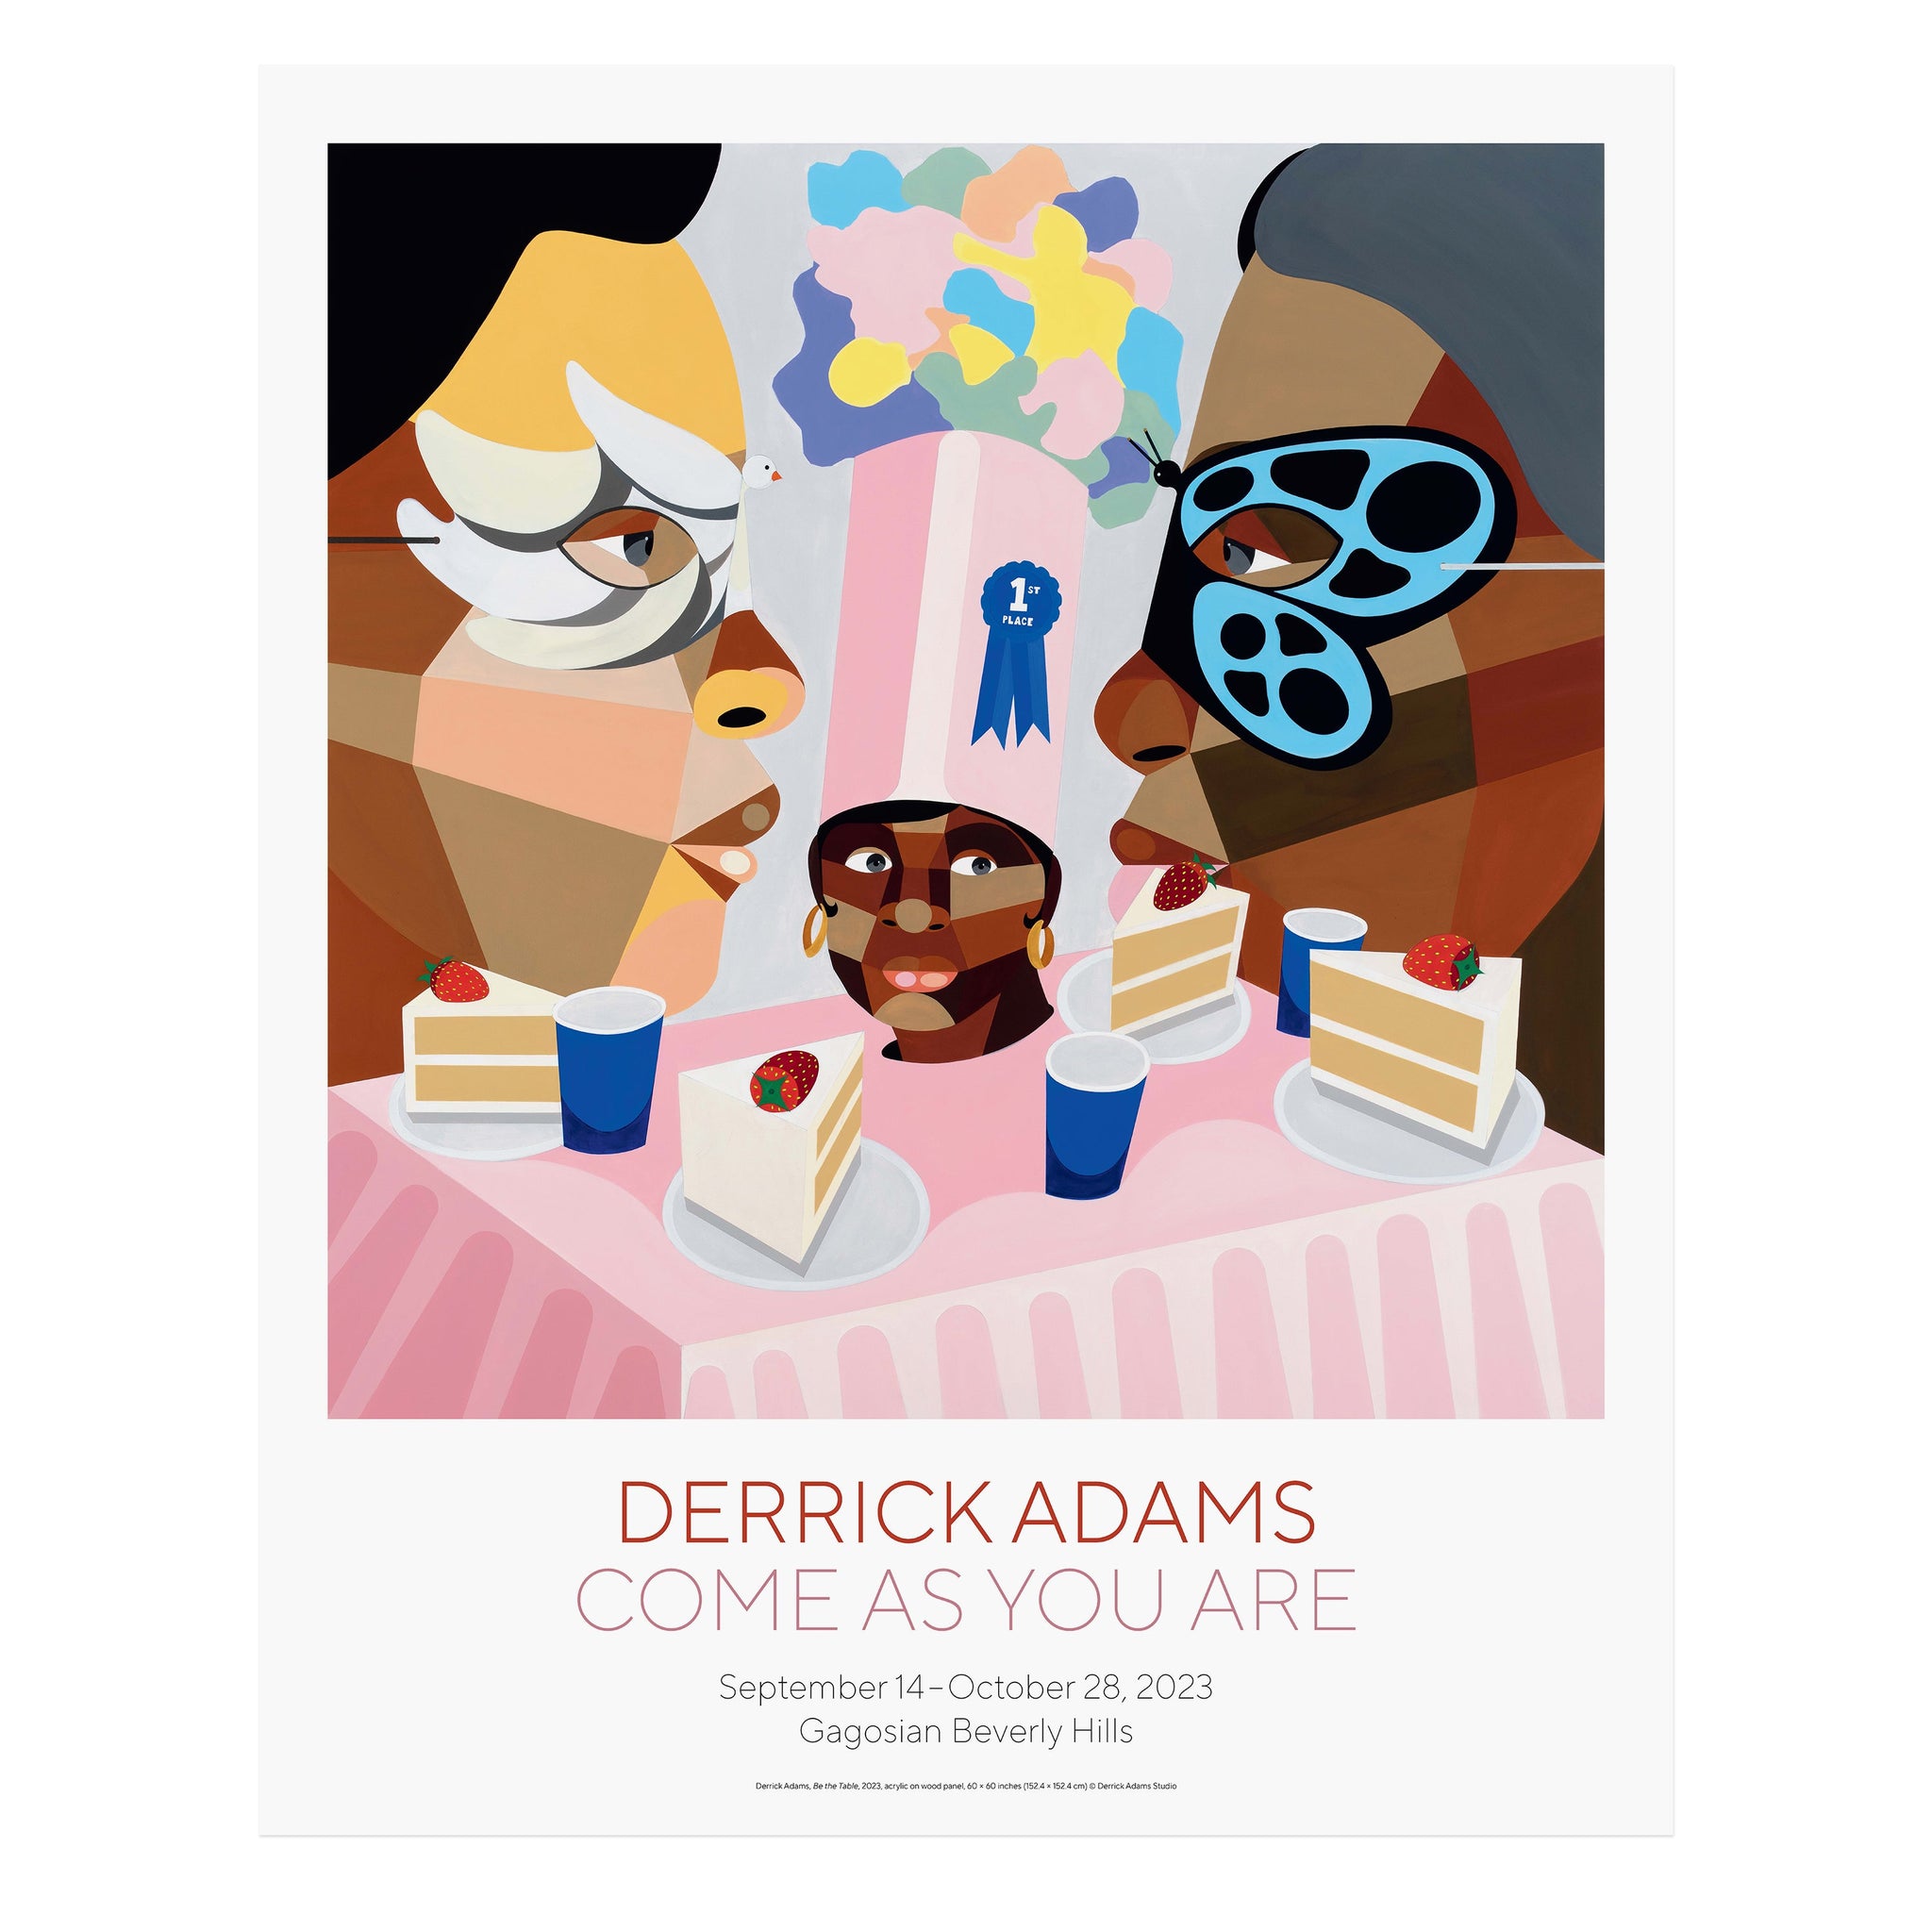 Derrick Adams: Come as You Are poster